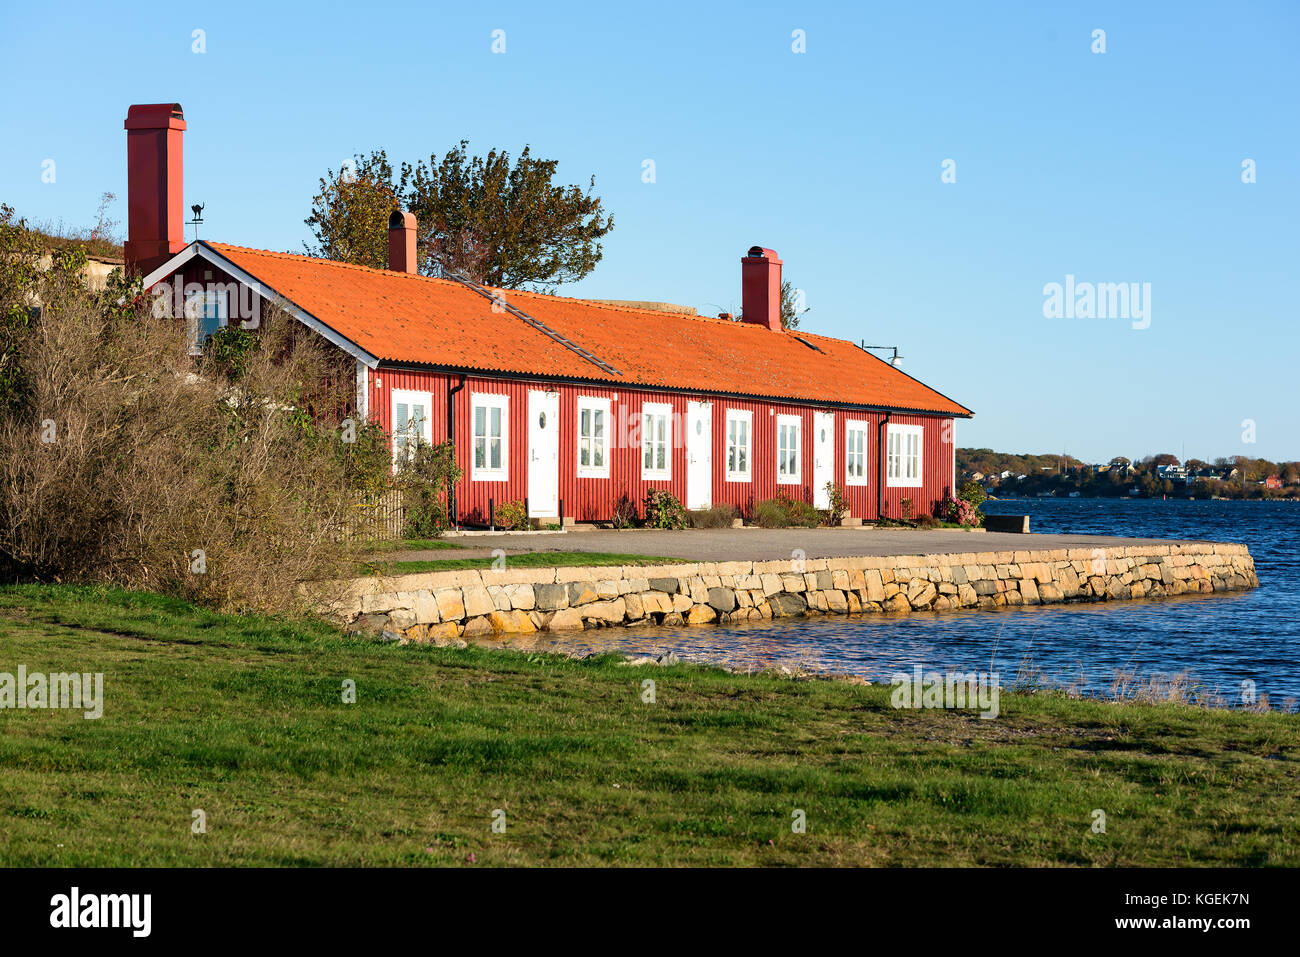 Karlskrona, Sweden - October 30, 2017: Documentary of everyday life and environment. Seaside red and white apartment building with stone pier as front Stock Photo